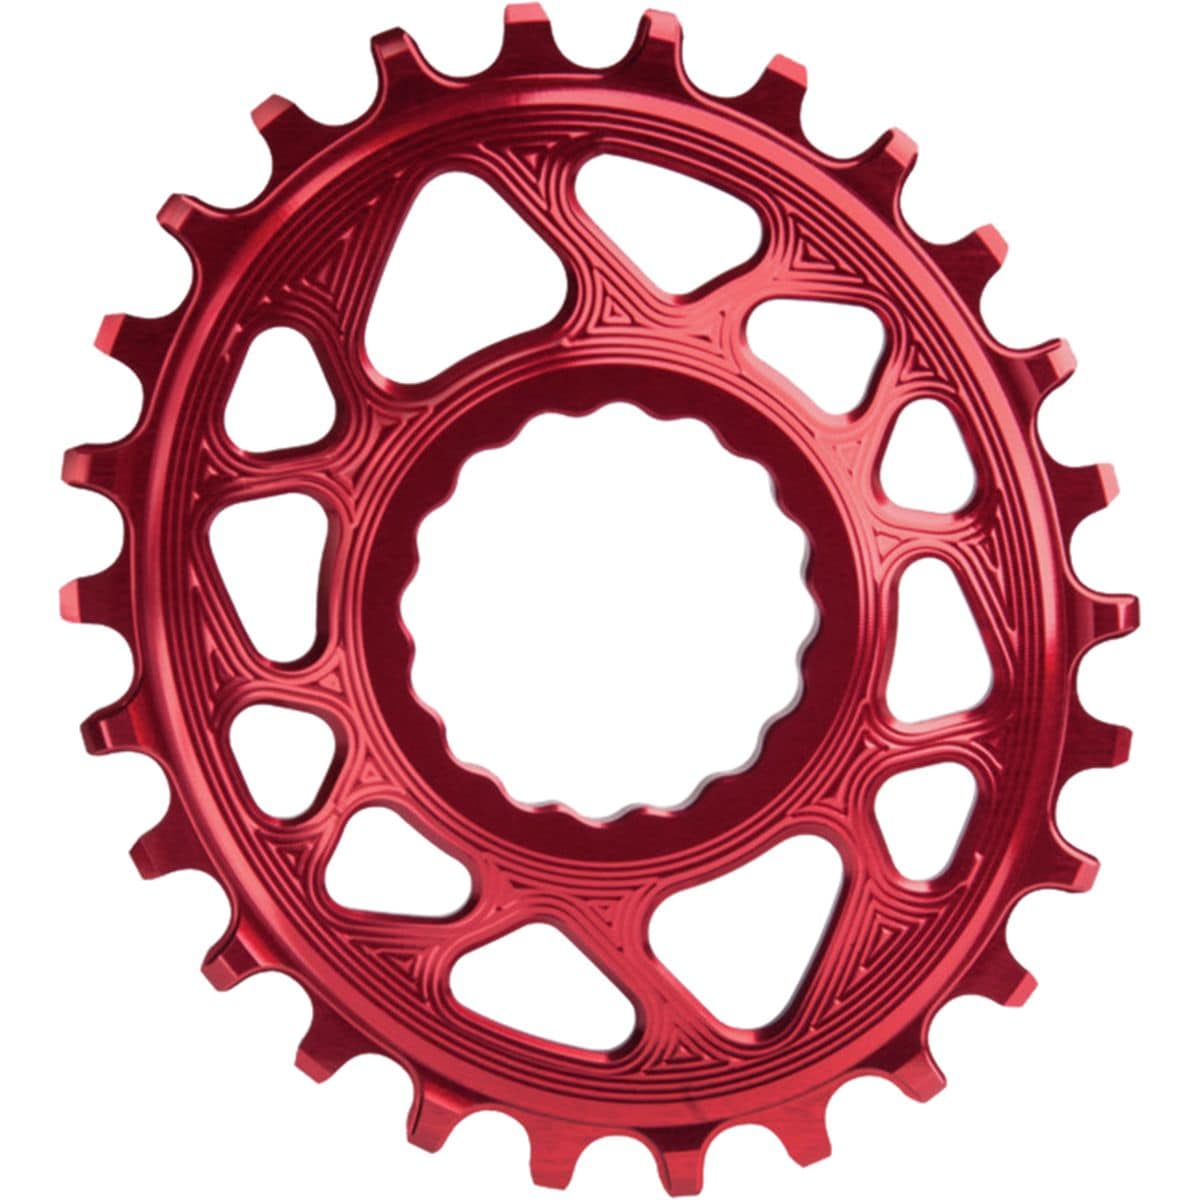 absoluteBLACK Race Face Oval Cinch Boost Direct Mount Traction Chainring Red, 32t